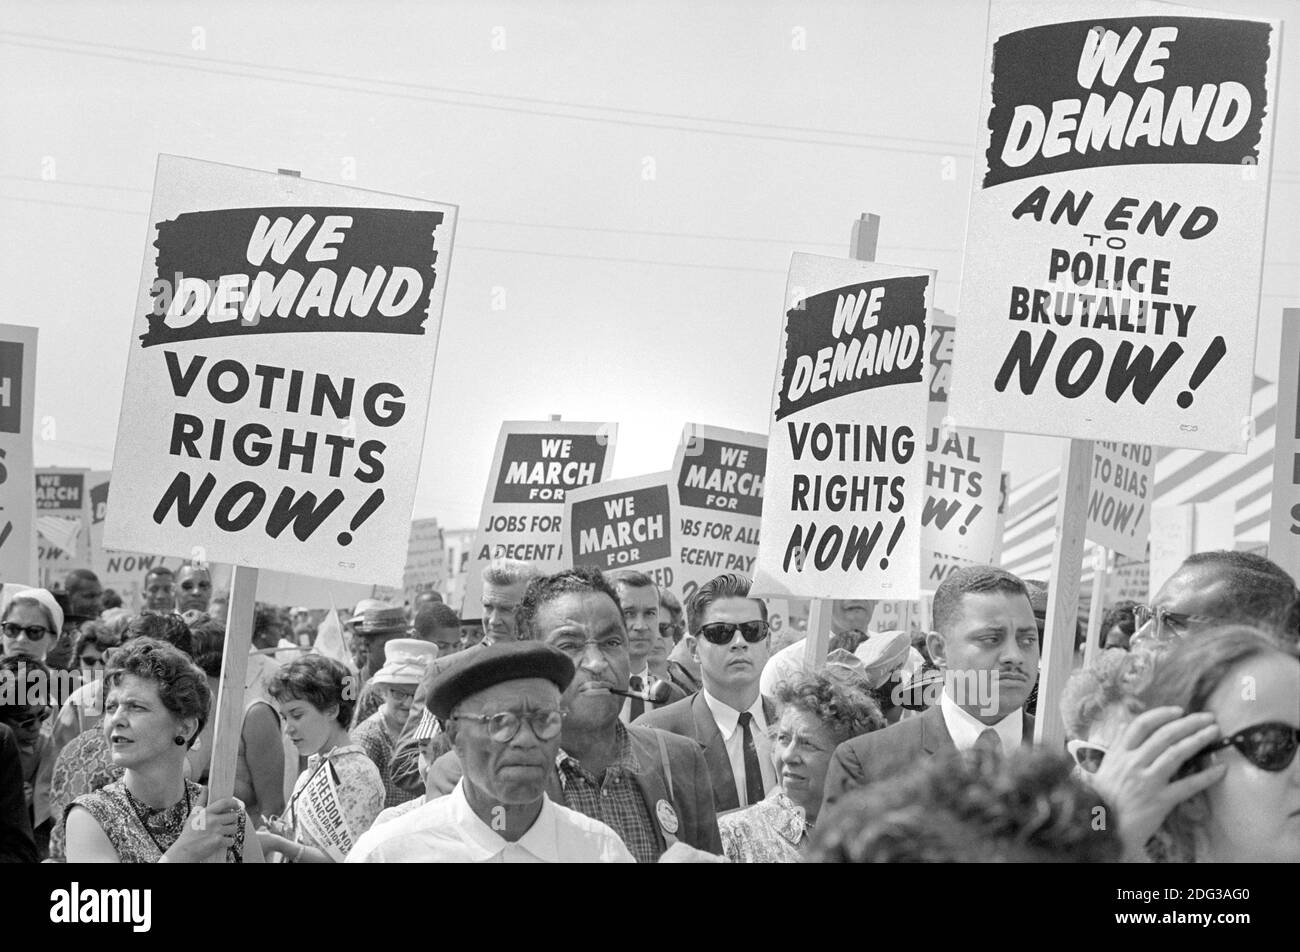 Protesters with Signs at March on Washington for Jobs and Freedom, Washington, D.C., USA, photo by Marion S. Trikosko, August 28, 1963 Stock Photo